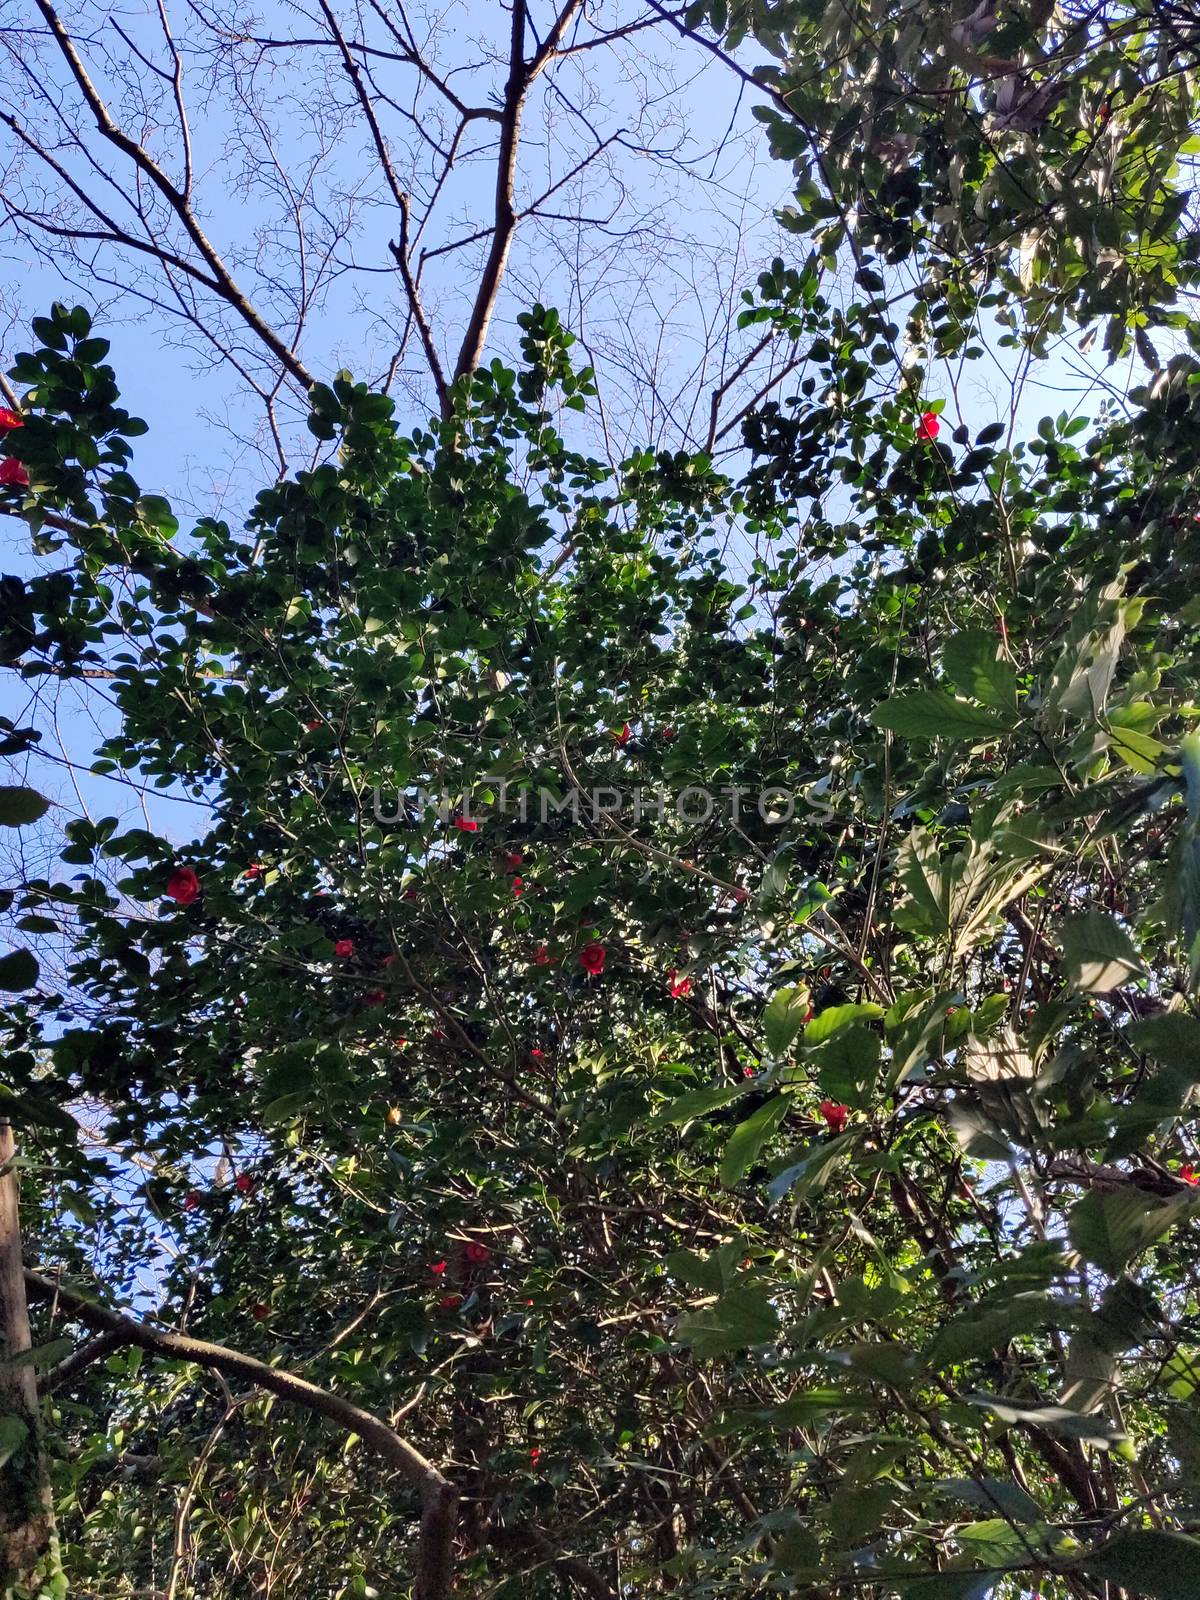 Tree with green leaves and red flowers by mshivangi92